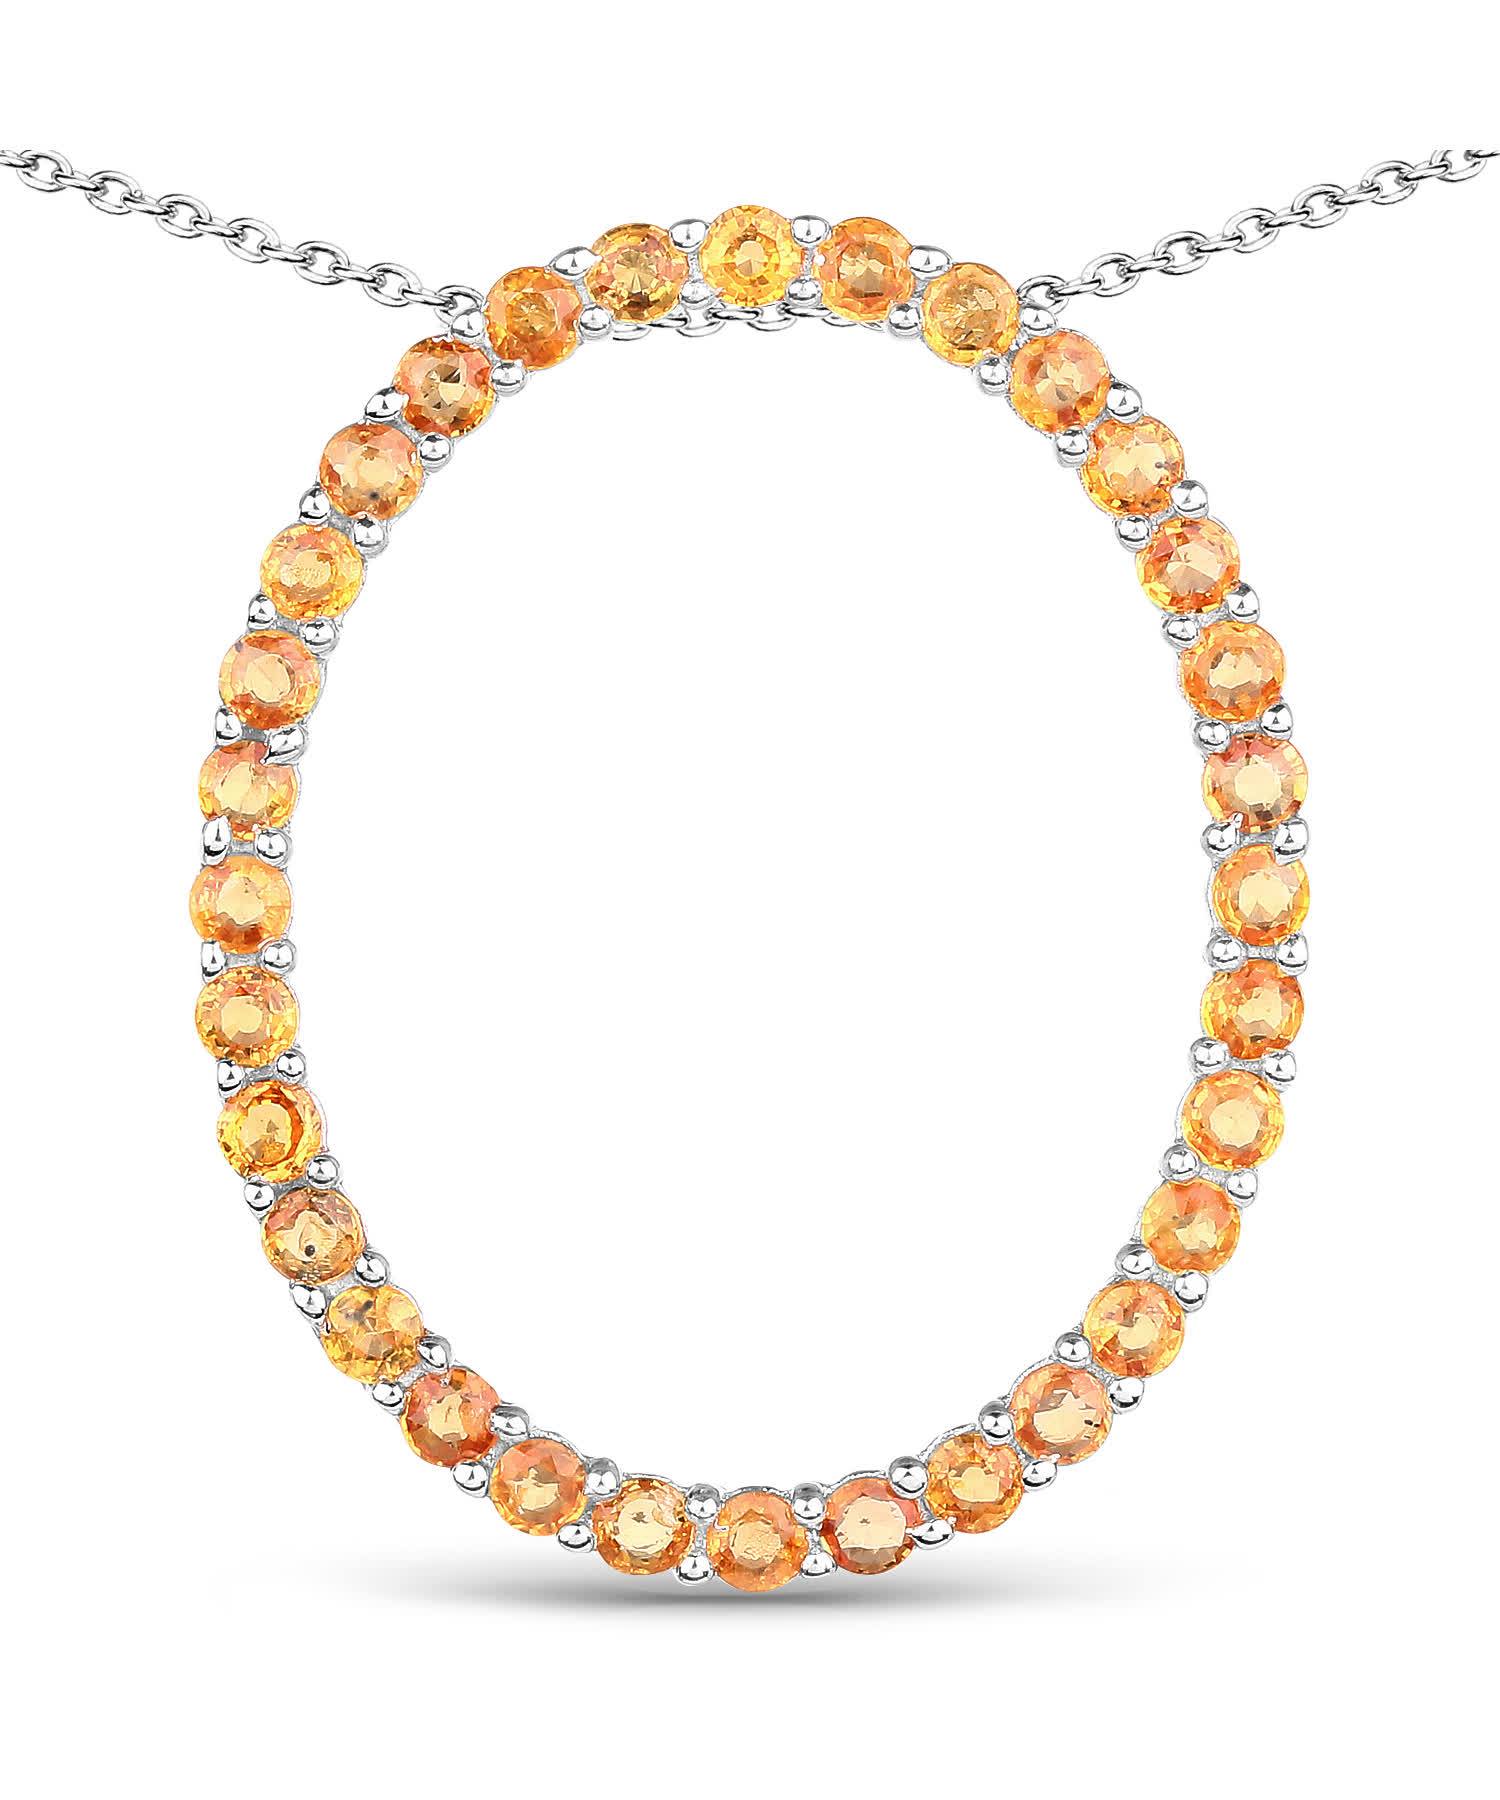 2.88ctw Natural Orange Sapphire Rhodium Plated 925 Sterling Silver Oval Pendant With Chain View 1